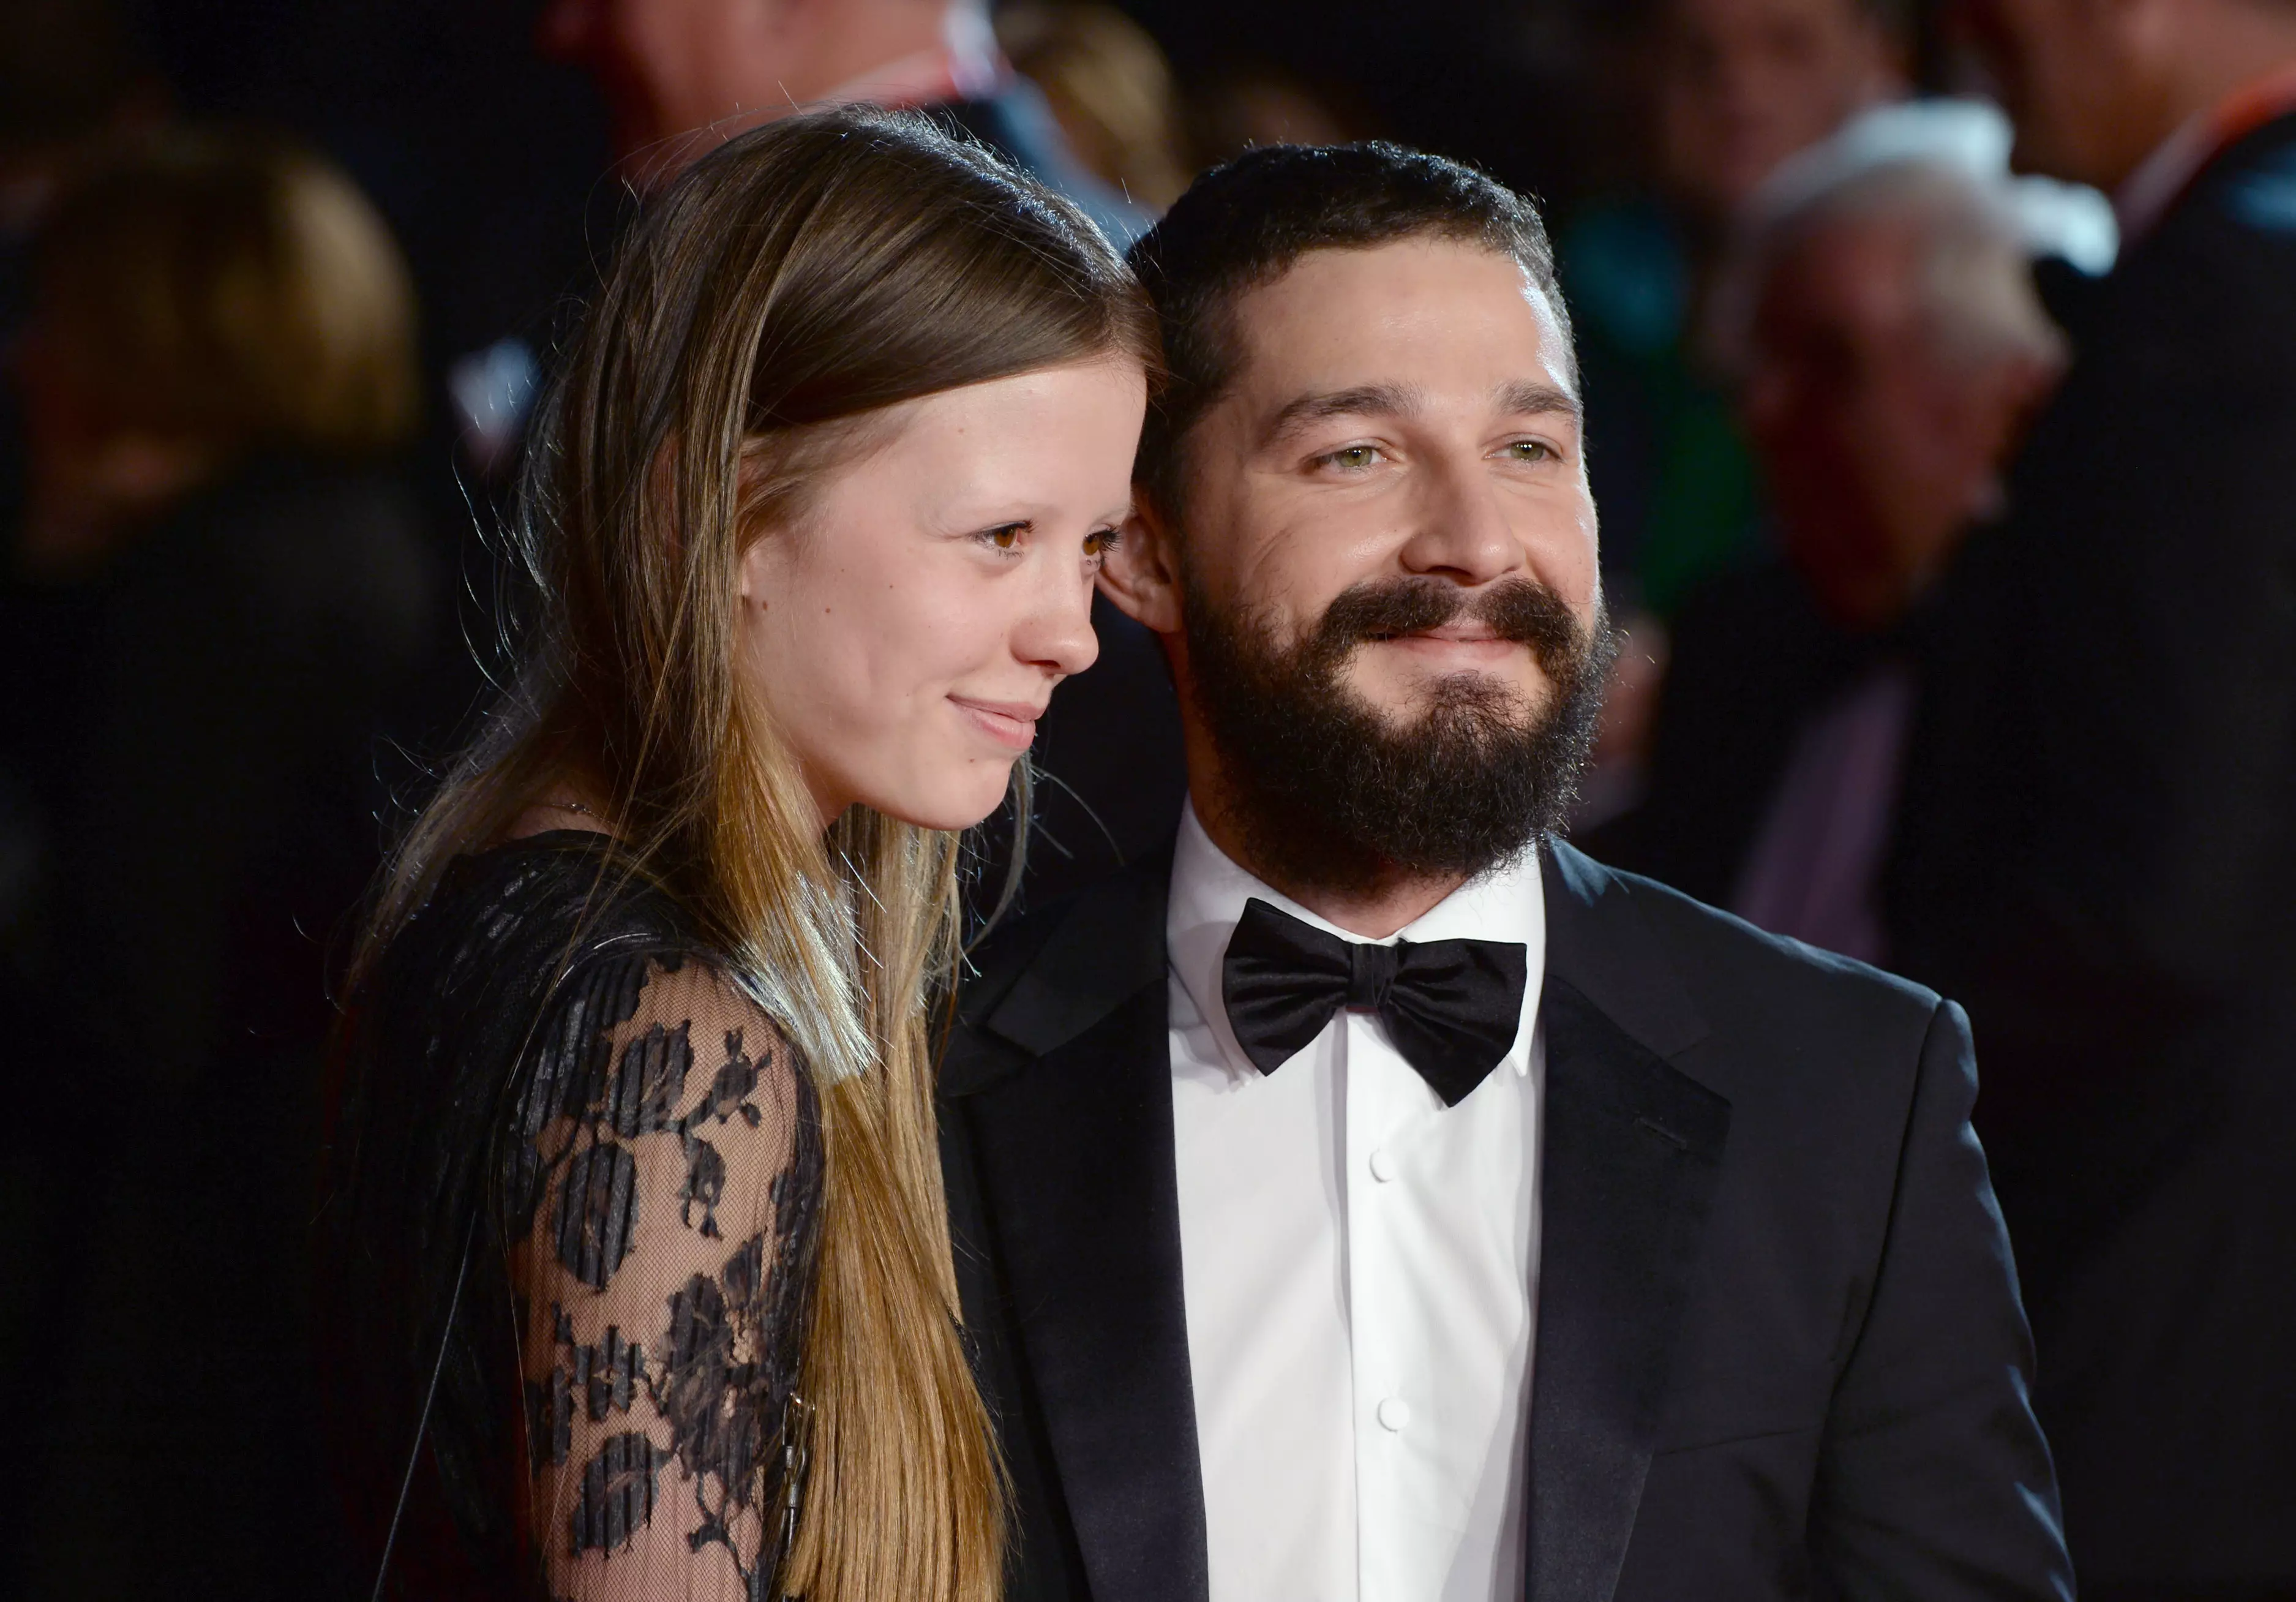 Shia LaBeouf Gets Married In The Most Shia LaBeouf Way Ever